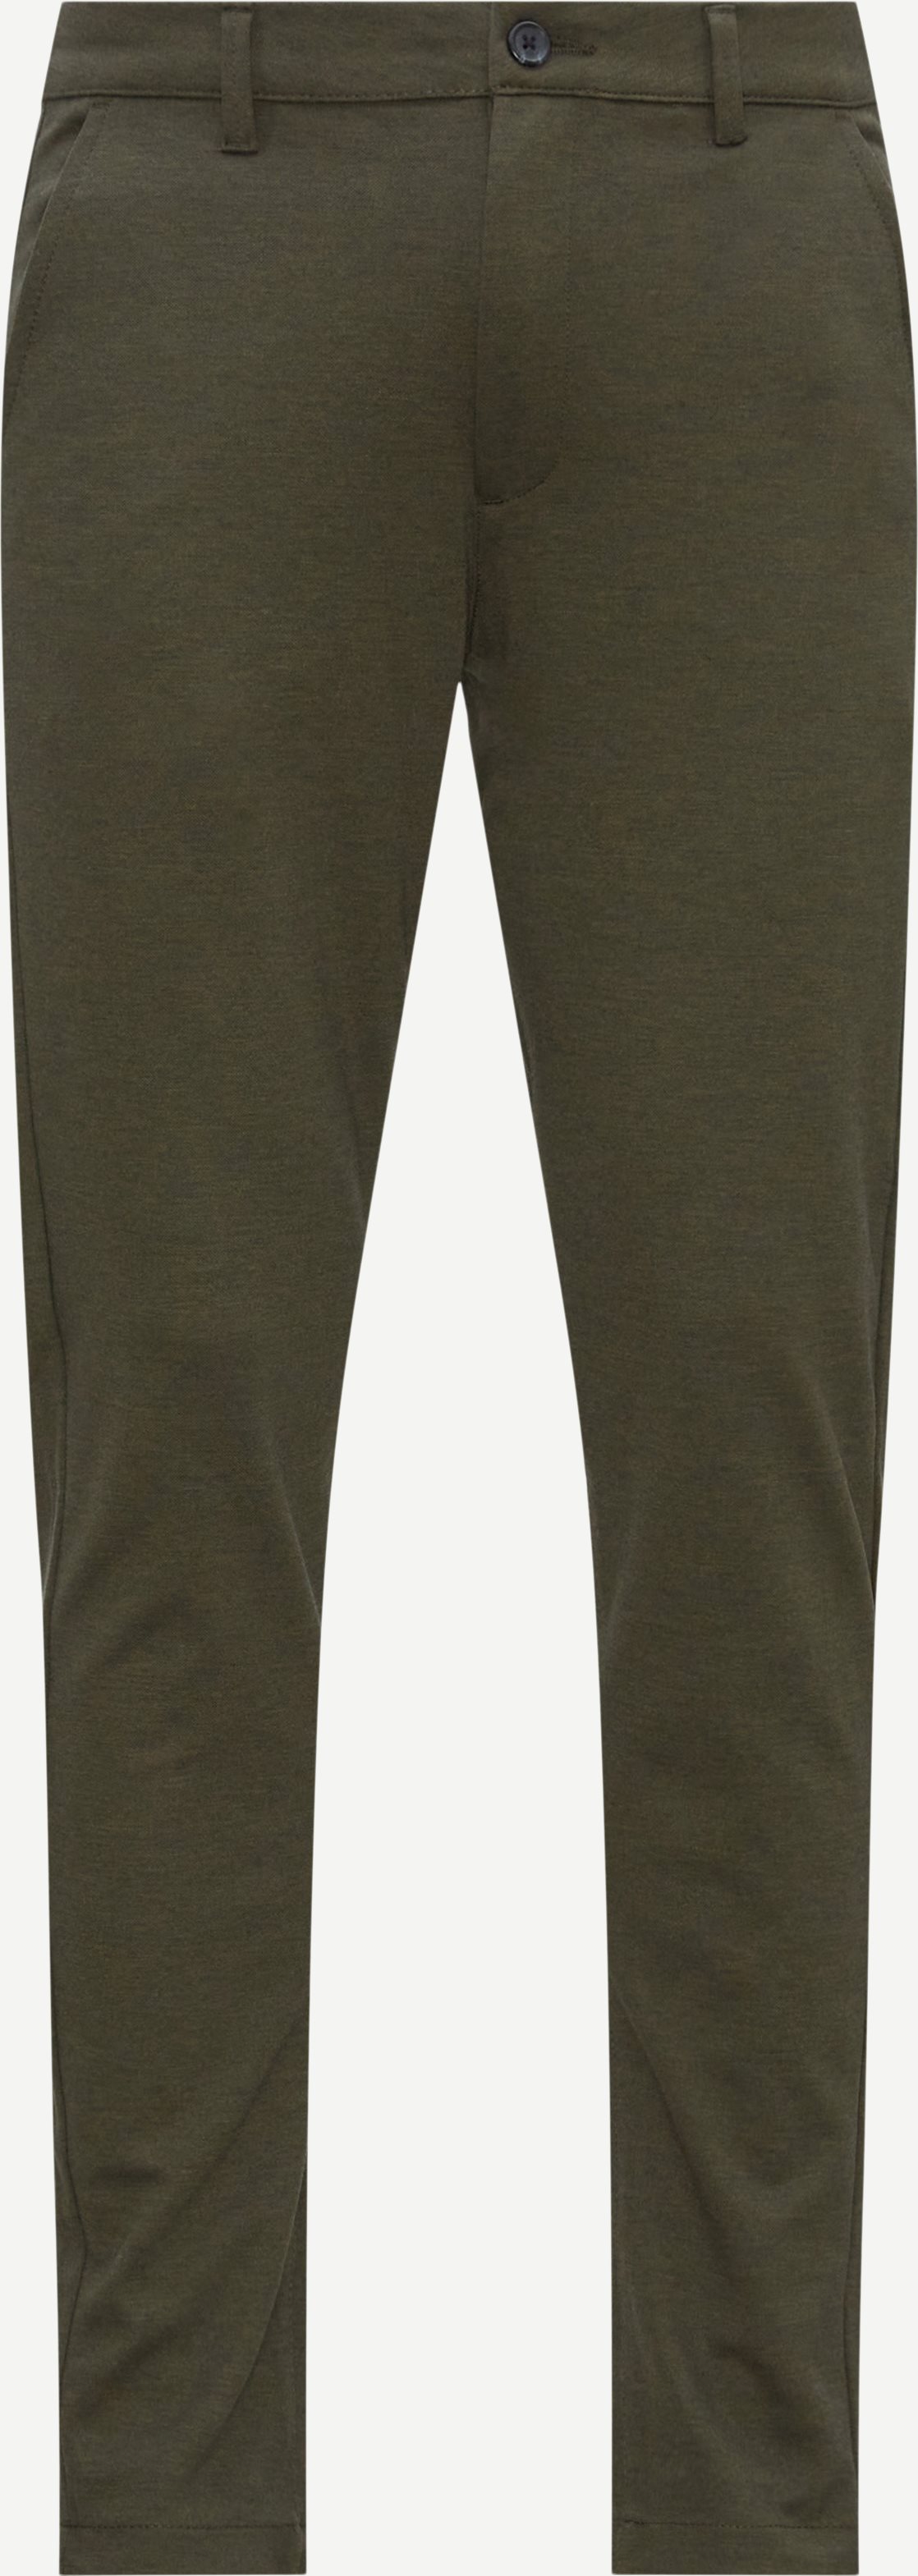 ICELAND Trousers TOTTI Army